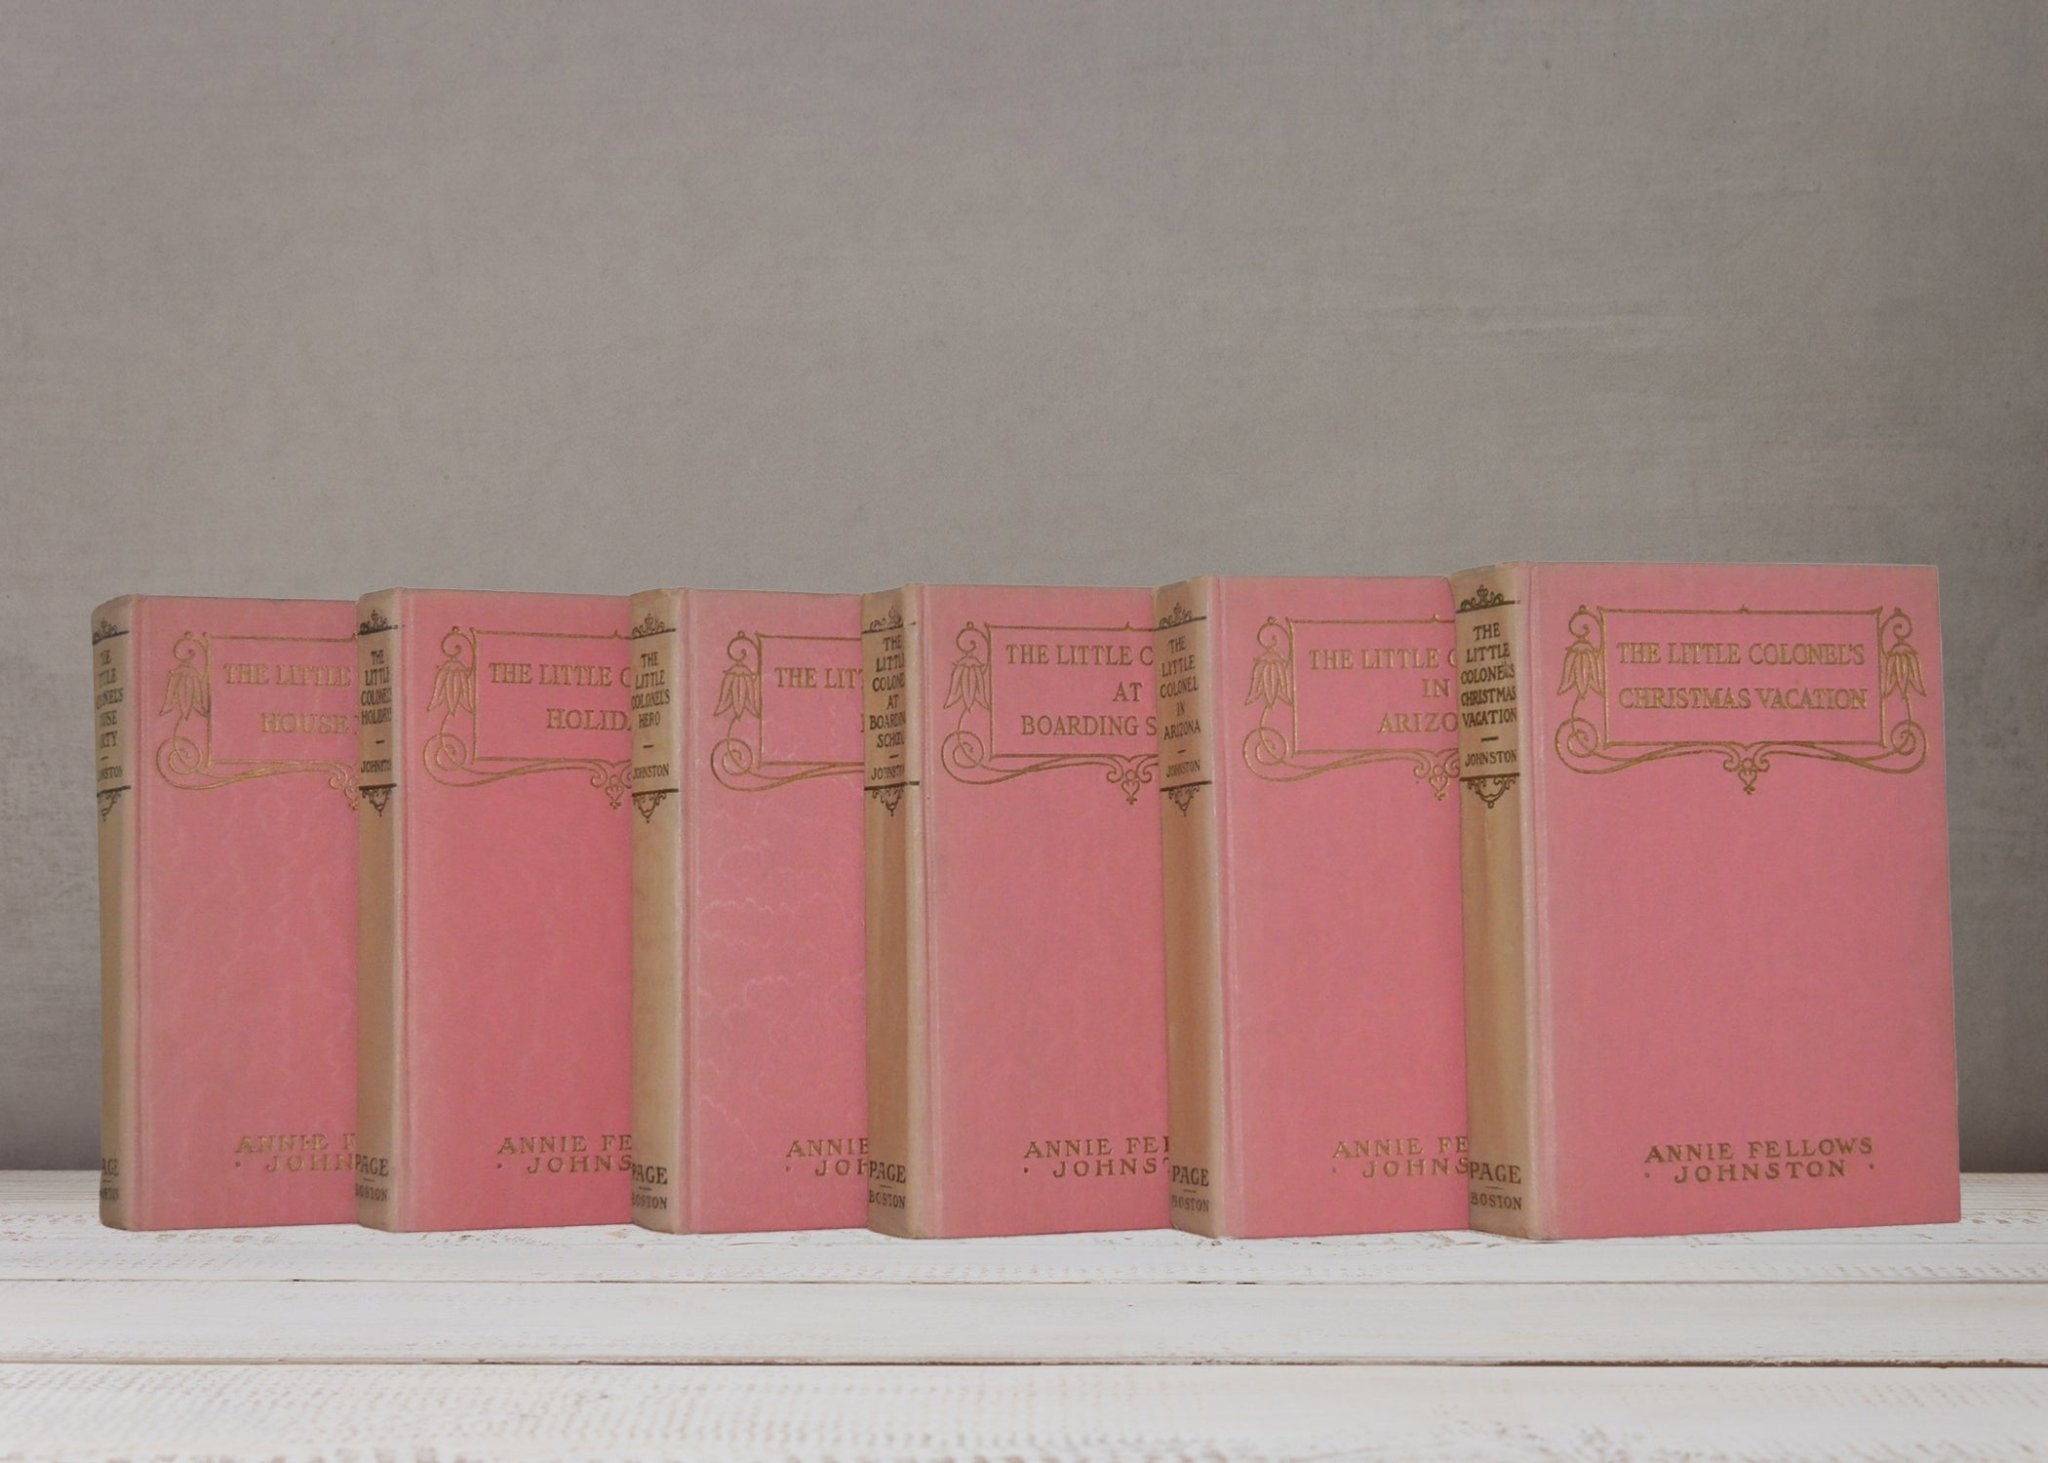 Antique Cloth Bound Book Décor – The Little Colonel Series by Annie Fellows Johnson – Pink & Beige - Brookfield Books